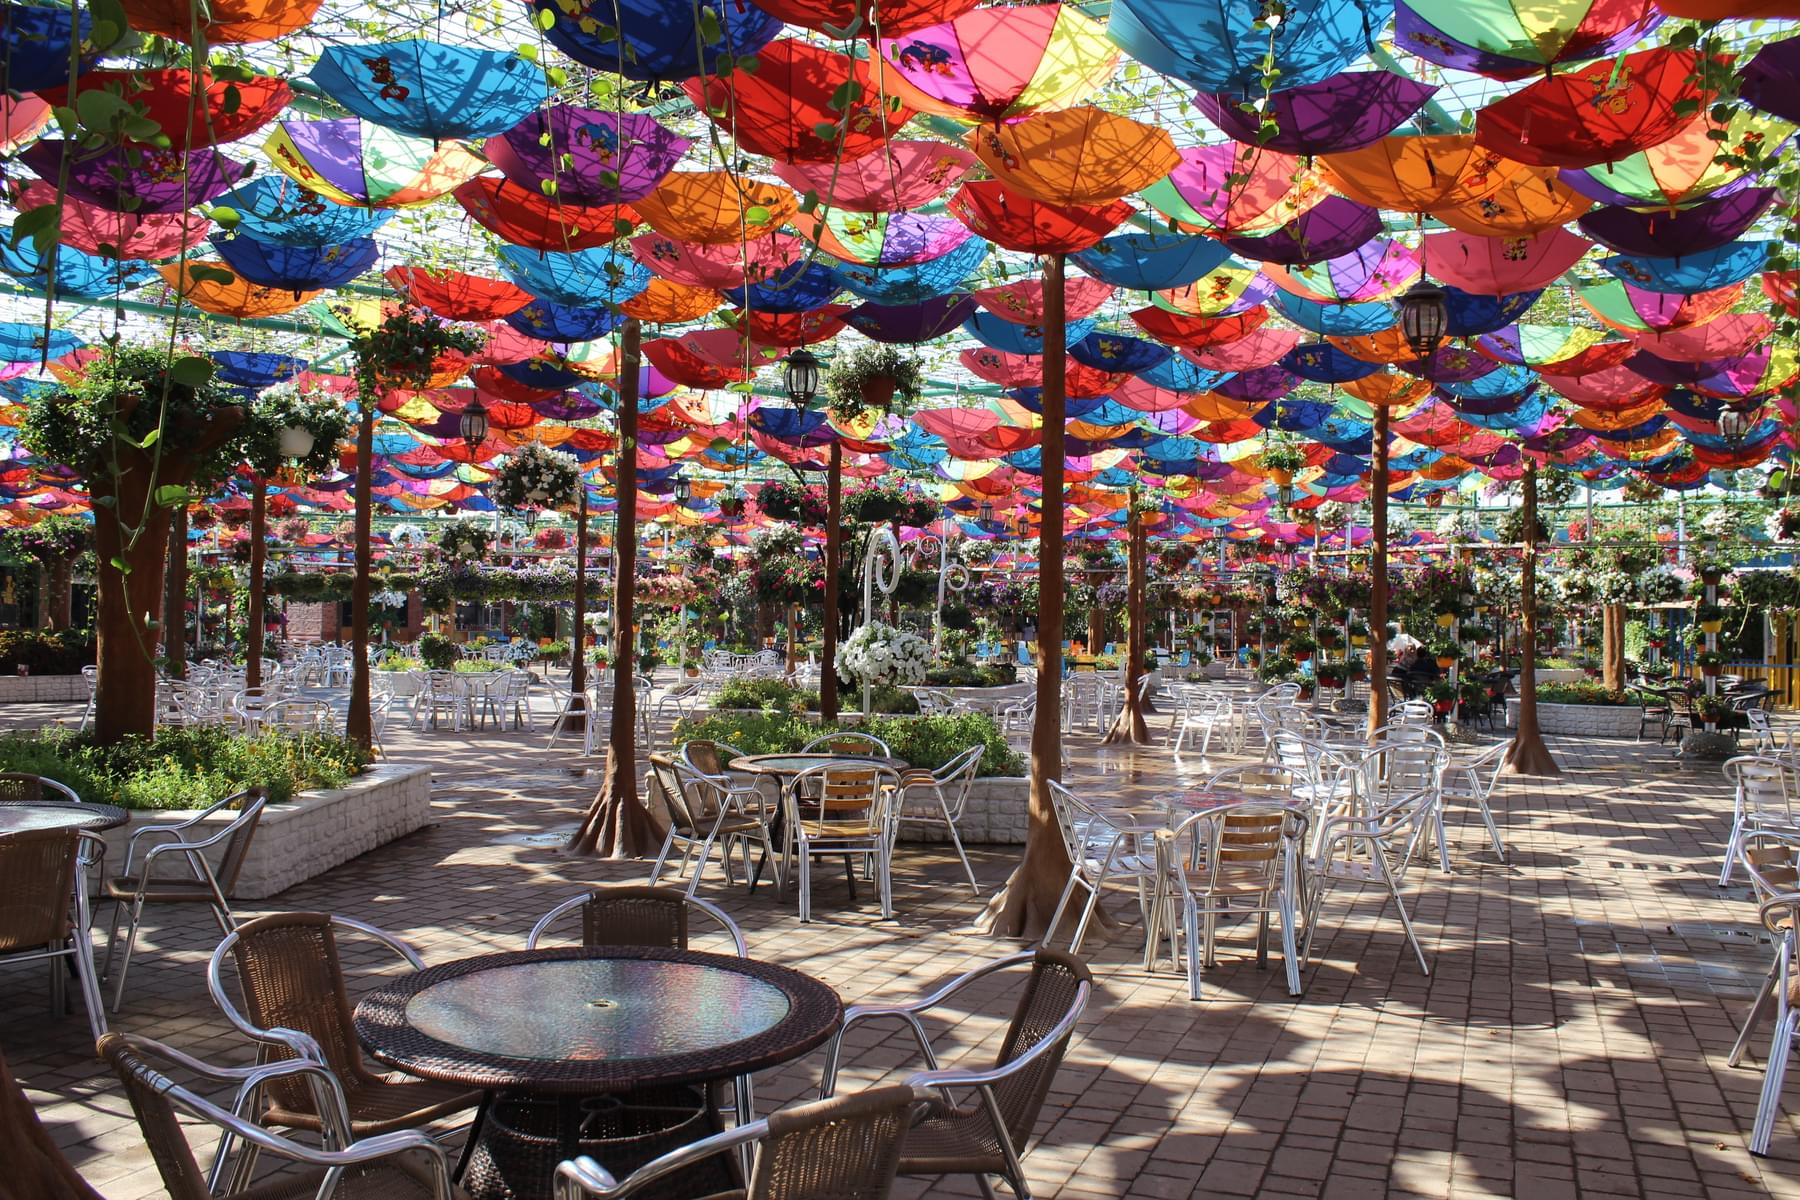 The colourful canopy of umbrellas will keep you cool